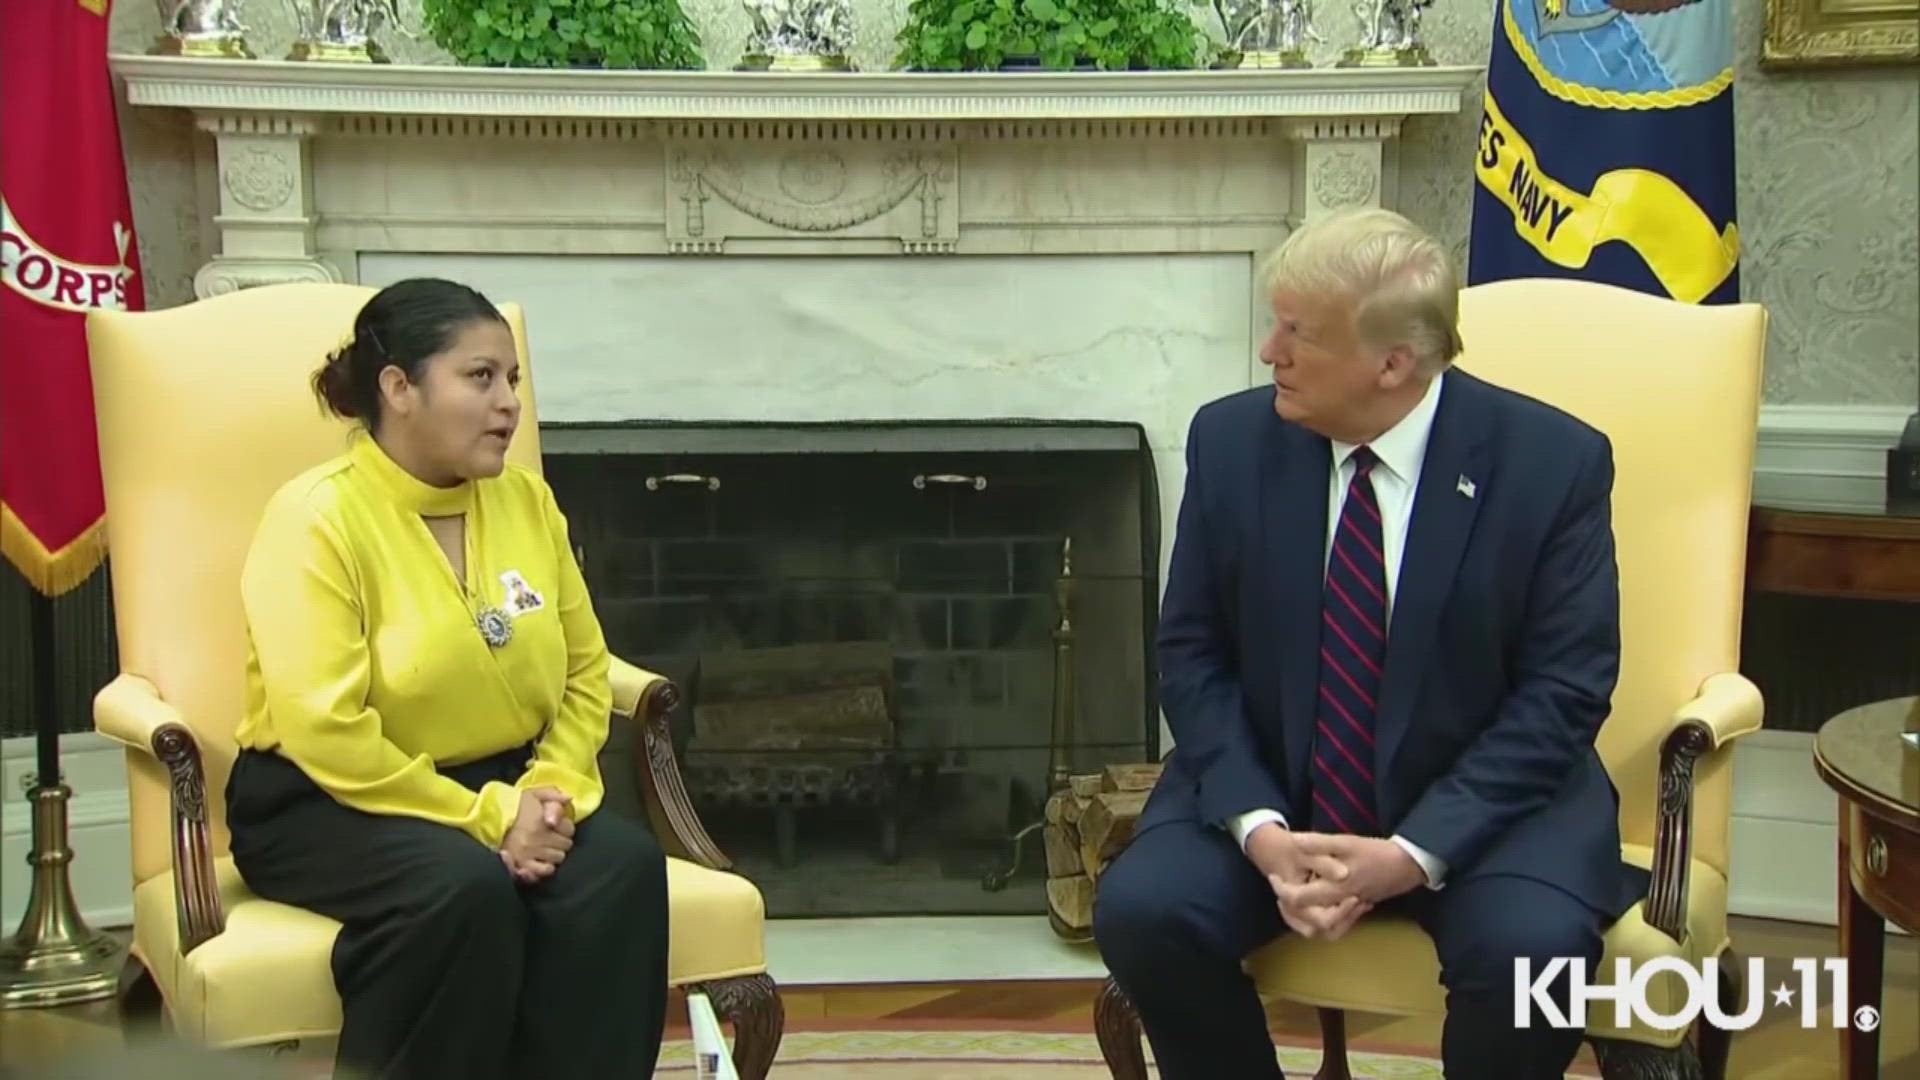 The family of Houston soldier Vanessa Guillen met with President Donald Trump Thursday to ask him to help change the culture in the military.